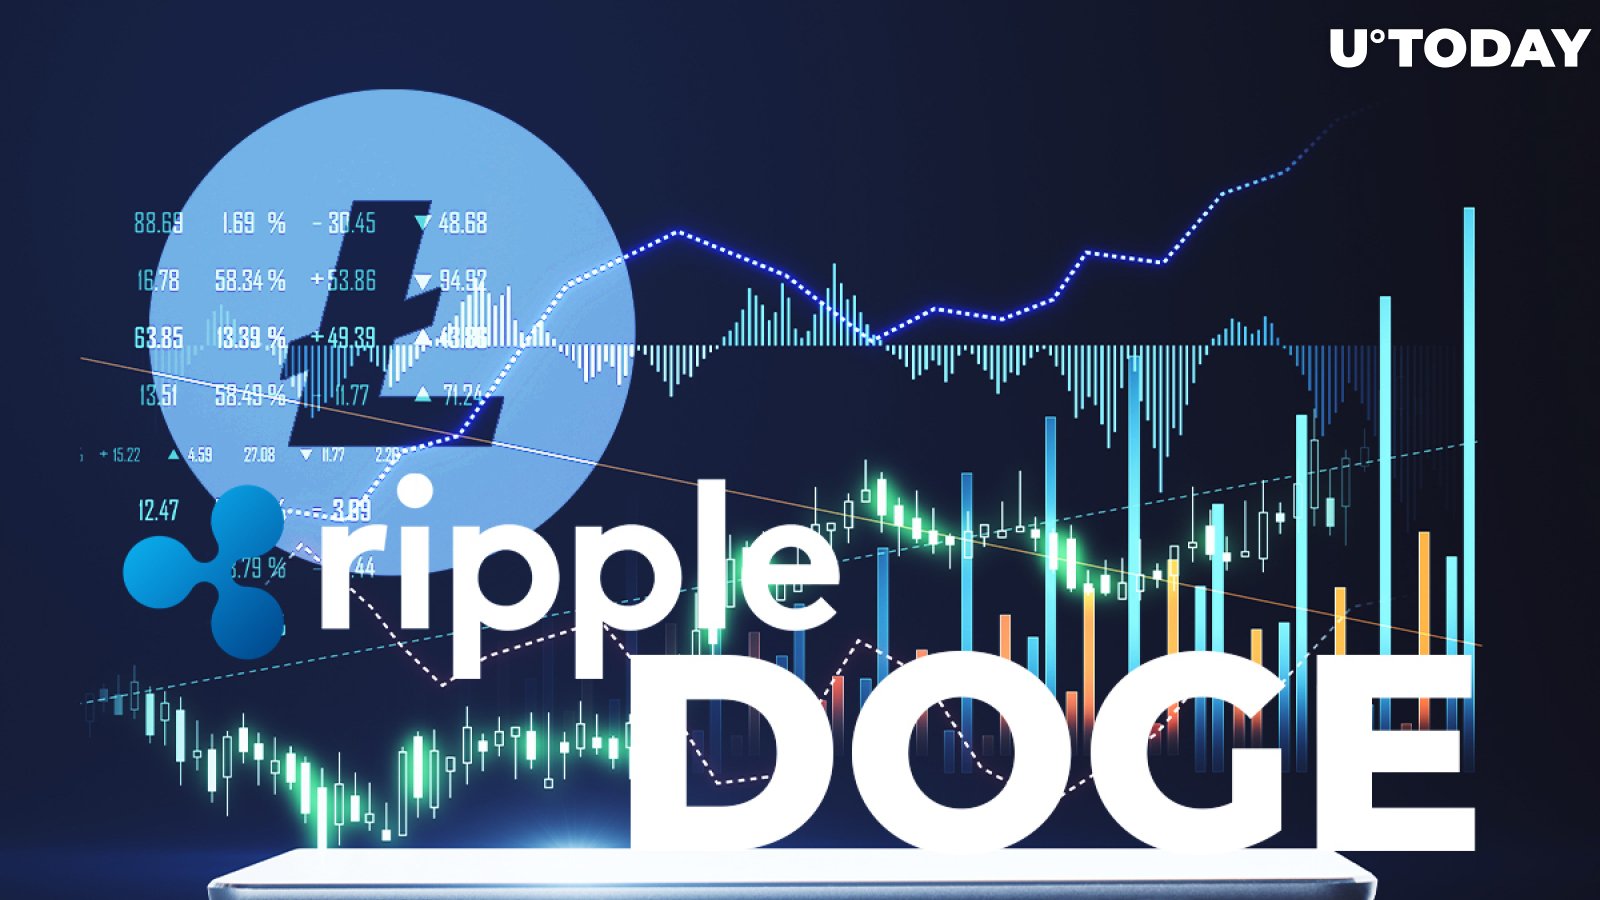 Litecoin (LTC) Price Record, Surprising Dogecoin (DOGE) Alert, Secrets in Ripple's Mail: Picks of the Day in Crypto